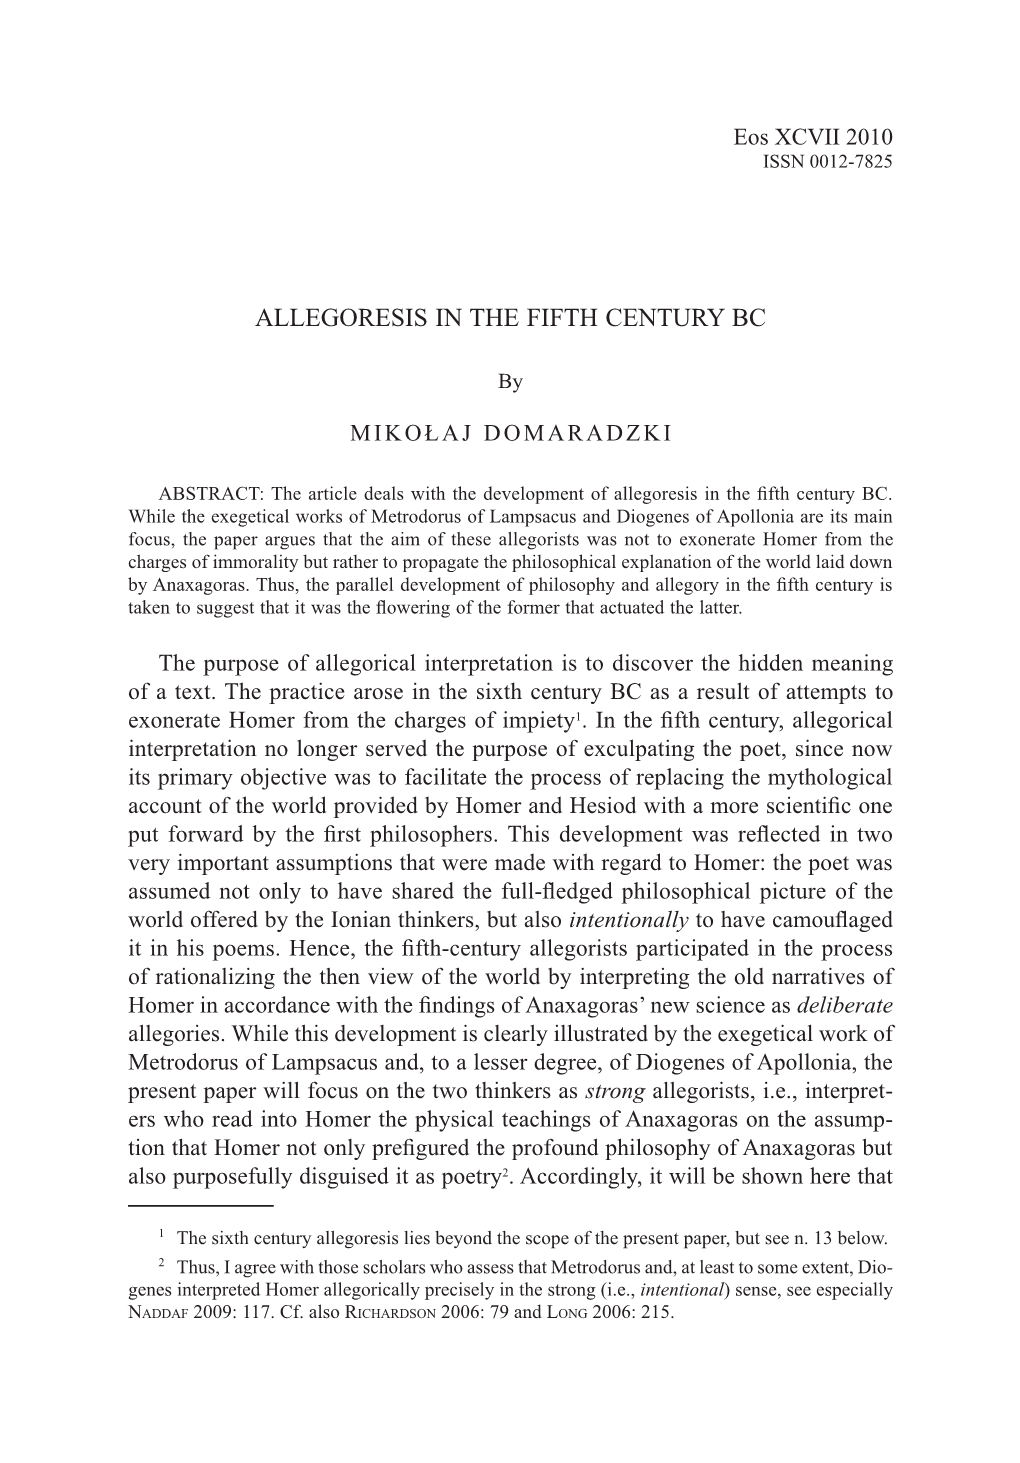 Allegoresis in the Fifth Century Bc